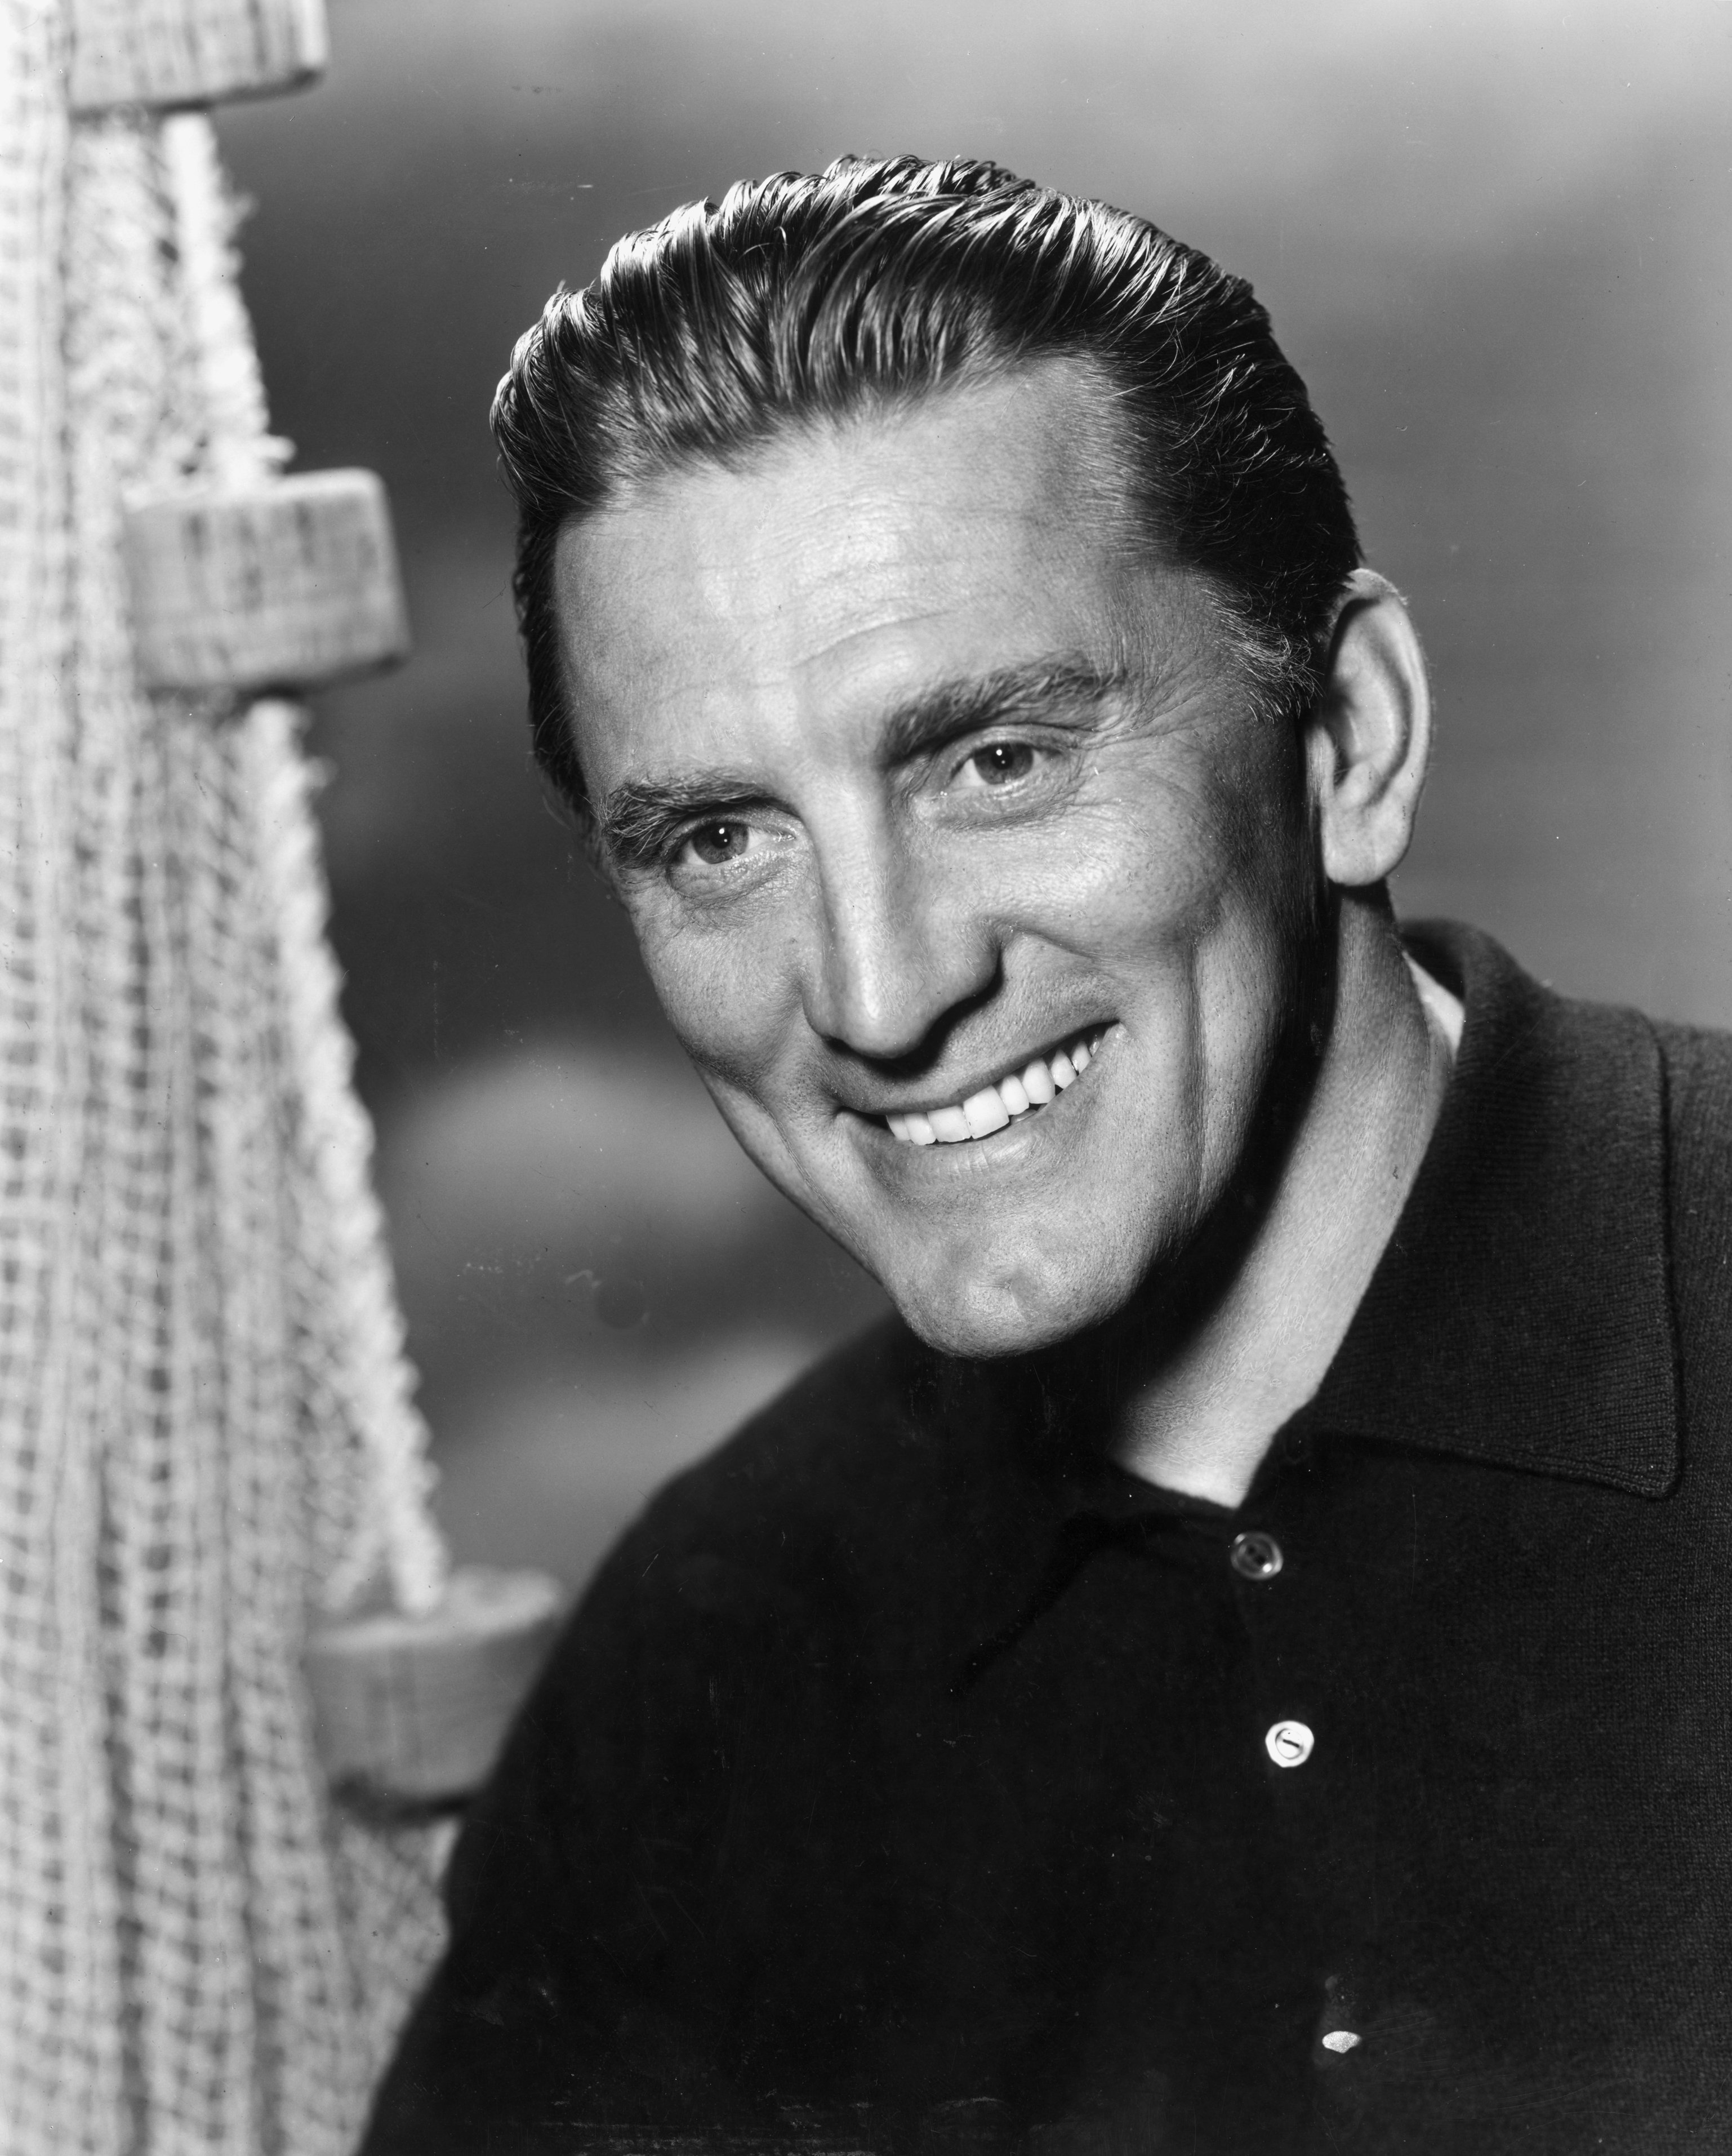 Humanitarian Kirk Douglas pictured broadly smiling while donning a black golf shirt. / Source: Getty Images